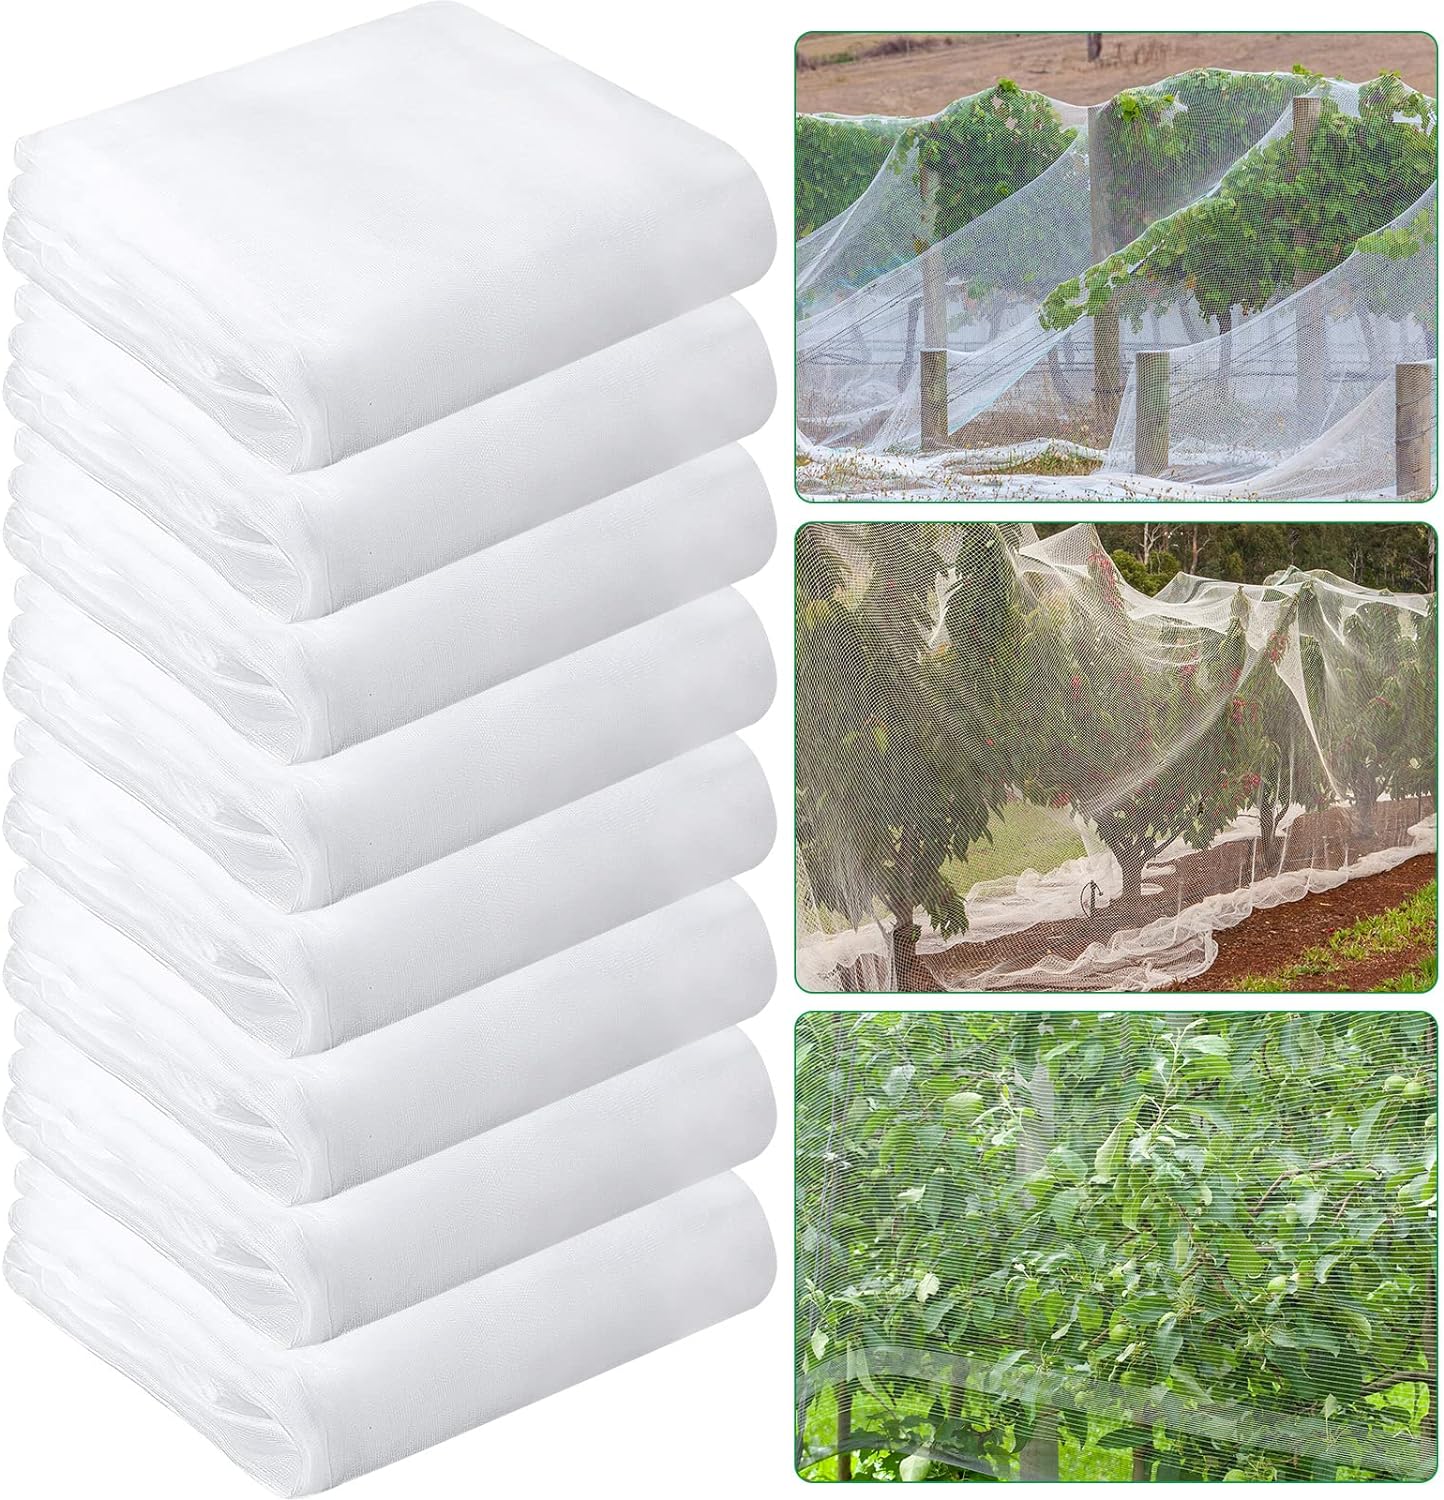 Lenwen 8 Pcs Garden Netting Mesh Ultra Fine Garden Plant Covers from Bird Screen Barrier Netting Greenhouse Row Covers for Vegetables Plants Fruits Flowers Crops Protection (10 x 20 FT)